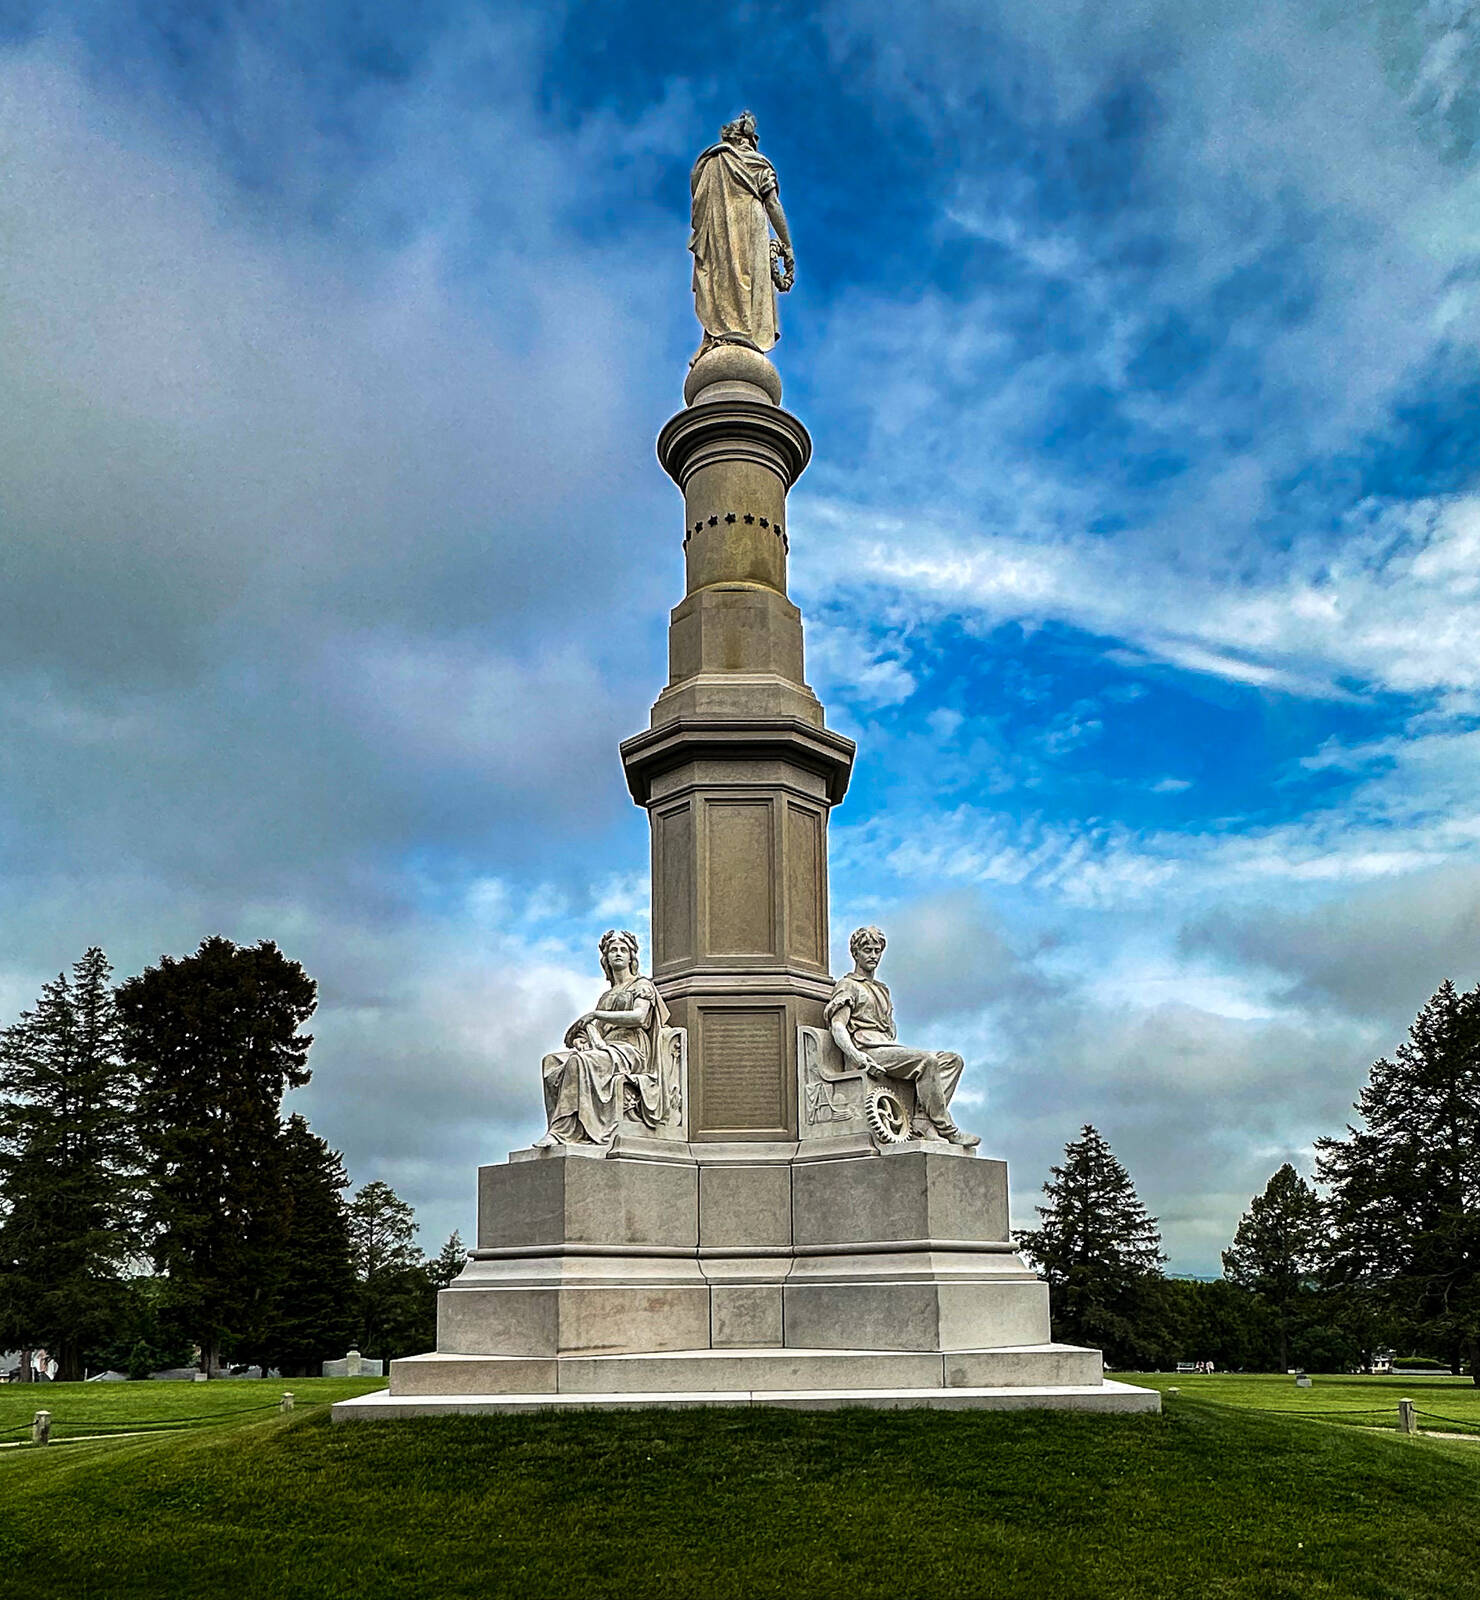 Image of Gettysburg National Military Park by Charley Corace